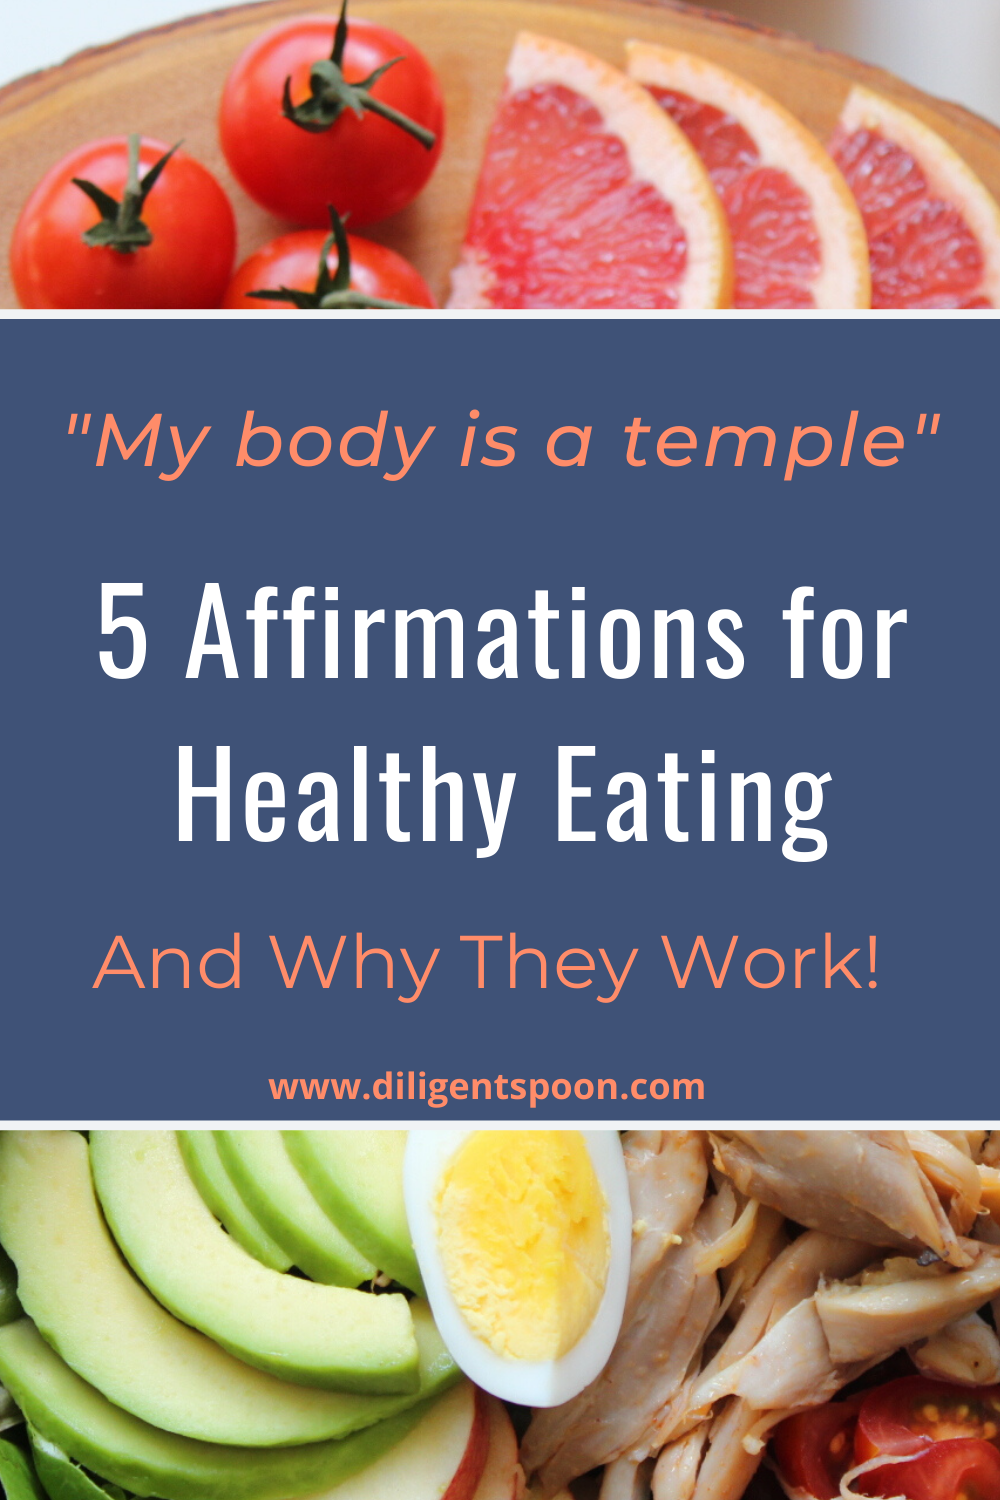 5 Affirmations for Healthy Eating